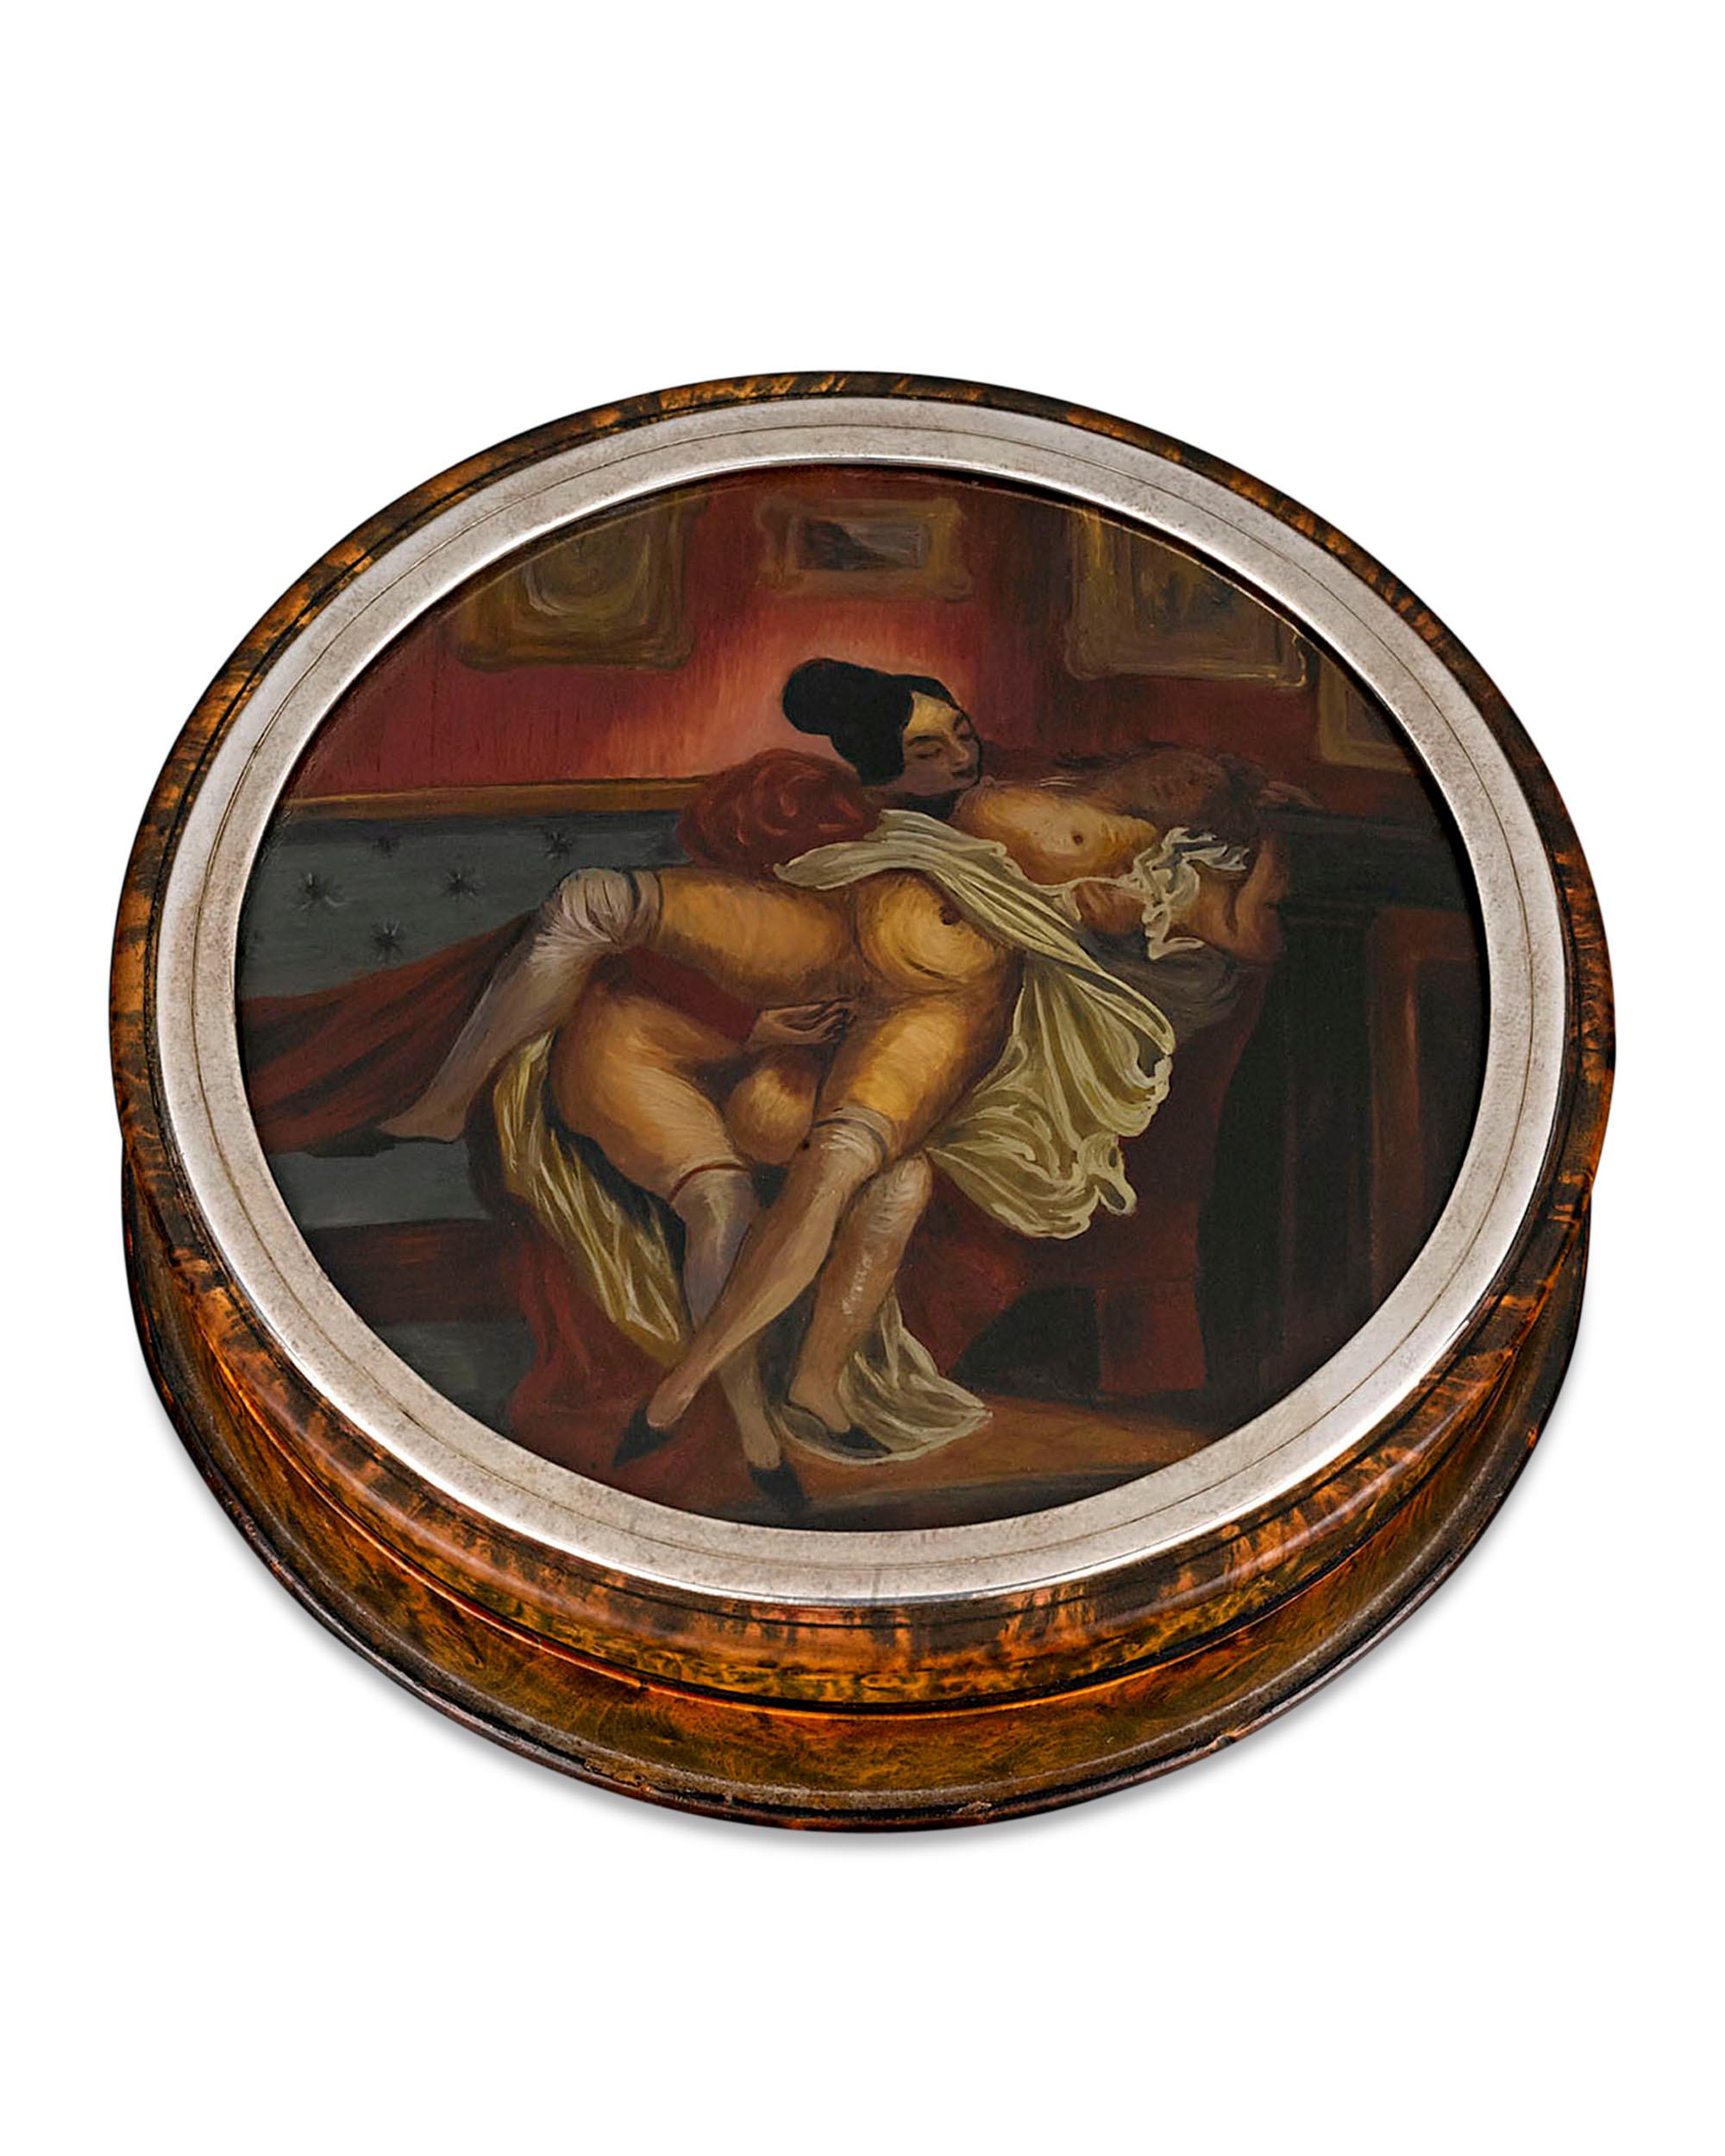 A scintillating Sapphic scene adorns the cover of this rare erotic snuff box. Set into the top of this burlwood and tortoiseshell container, this highly detailed tableau of two women in the throes of ecstasy is actually comprised of a base and